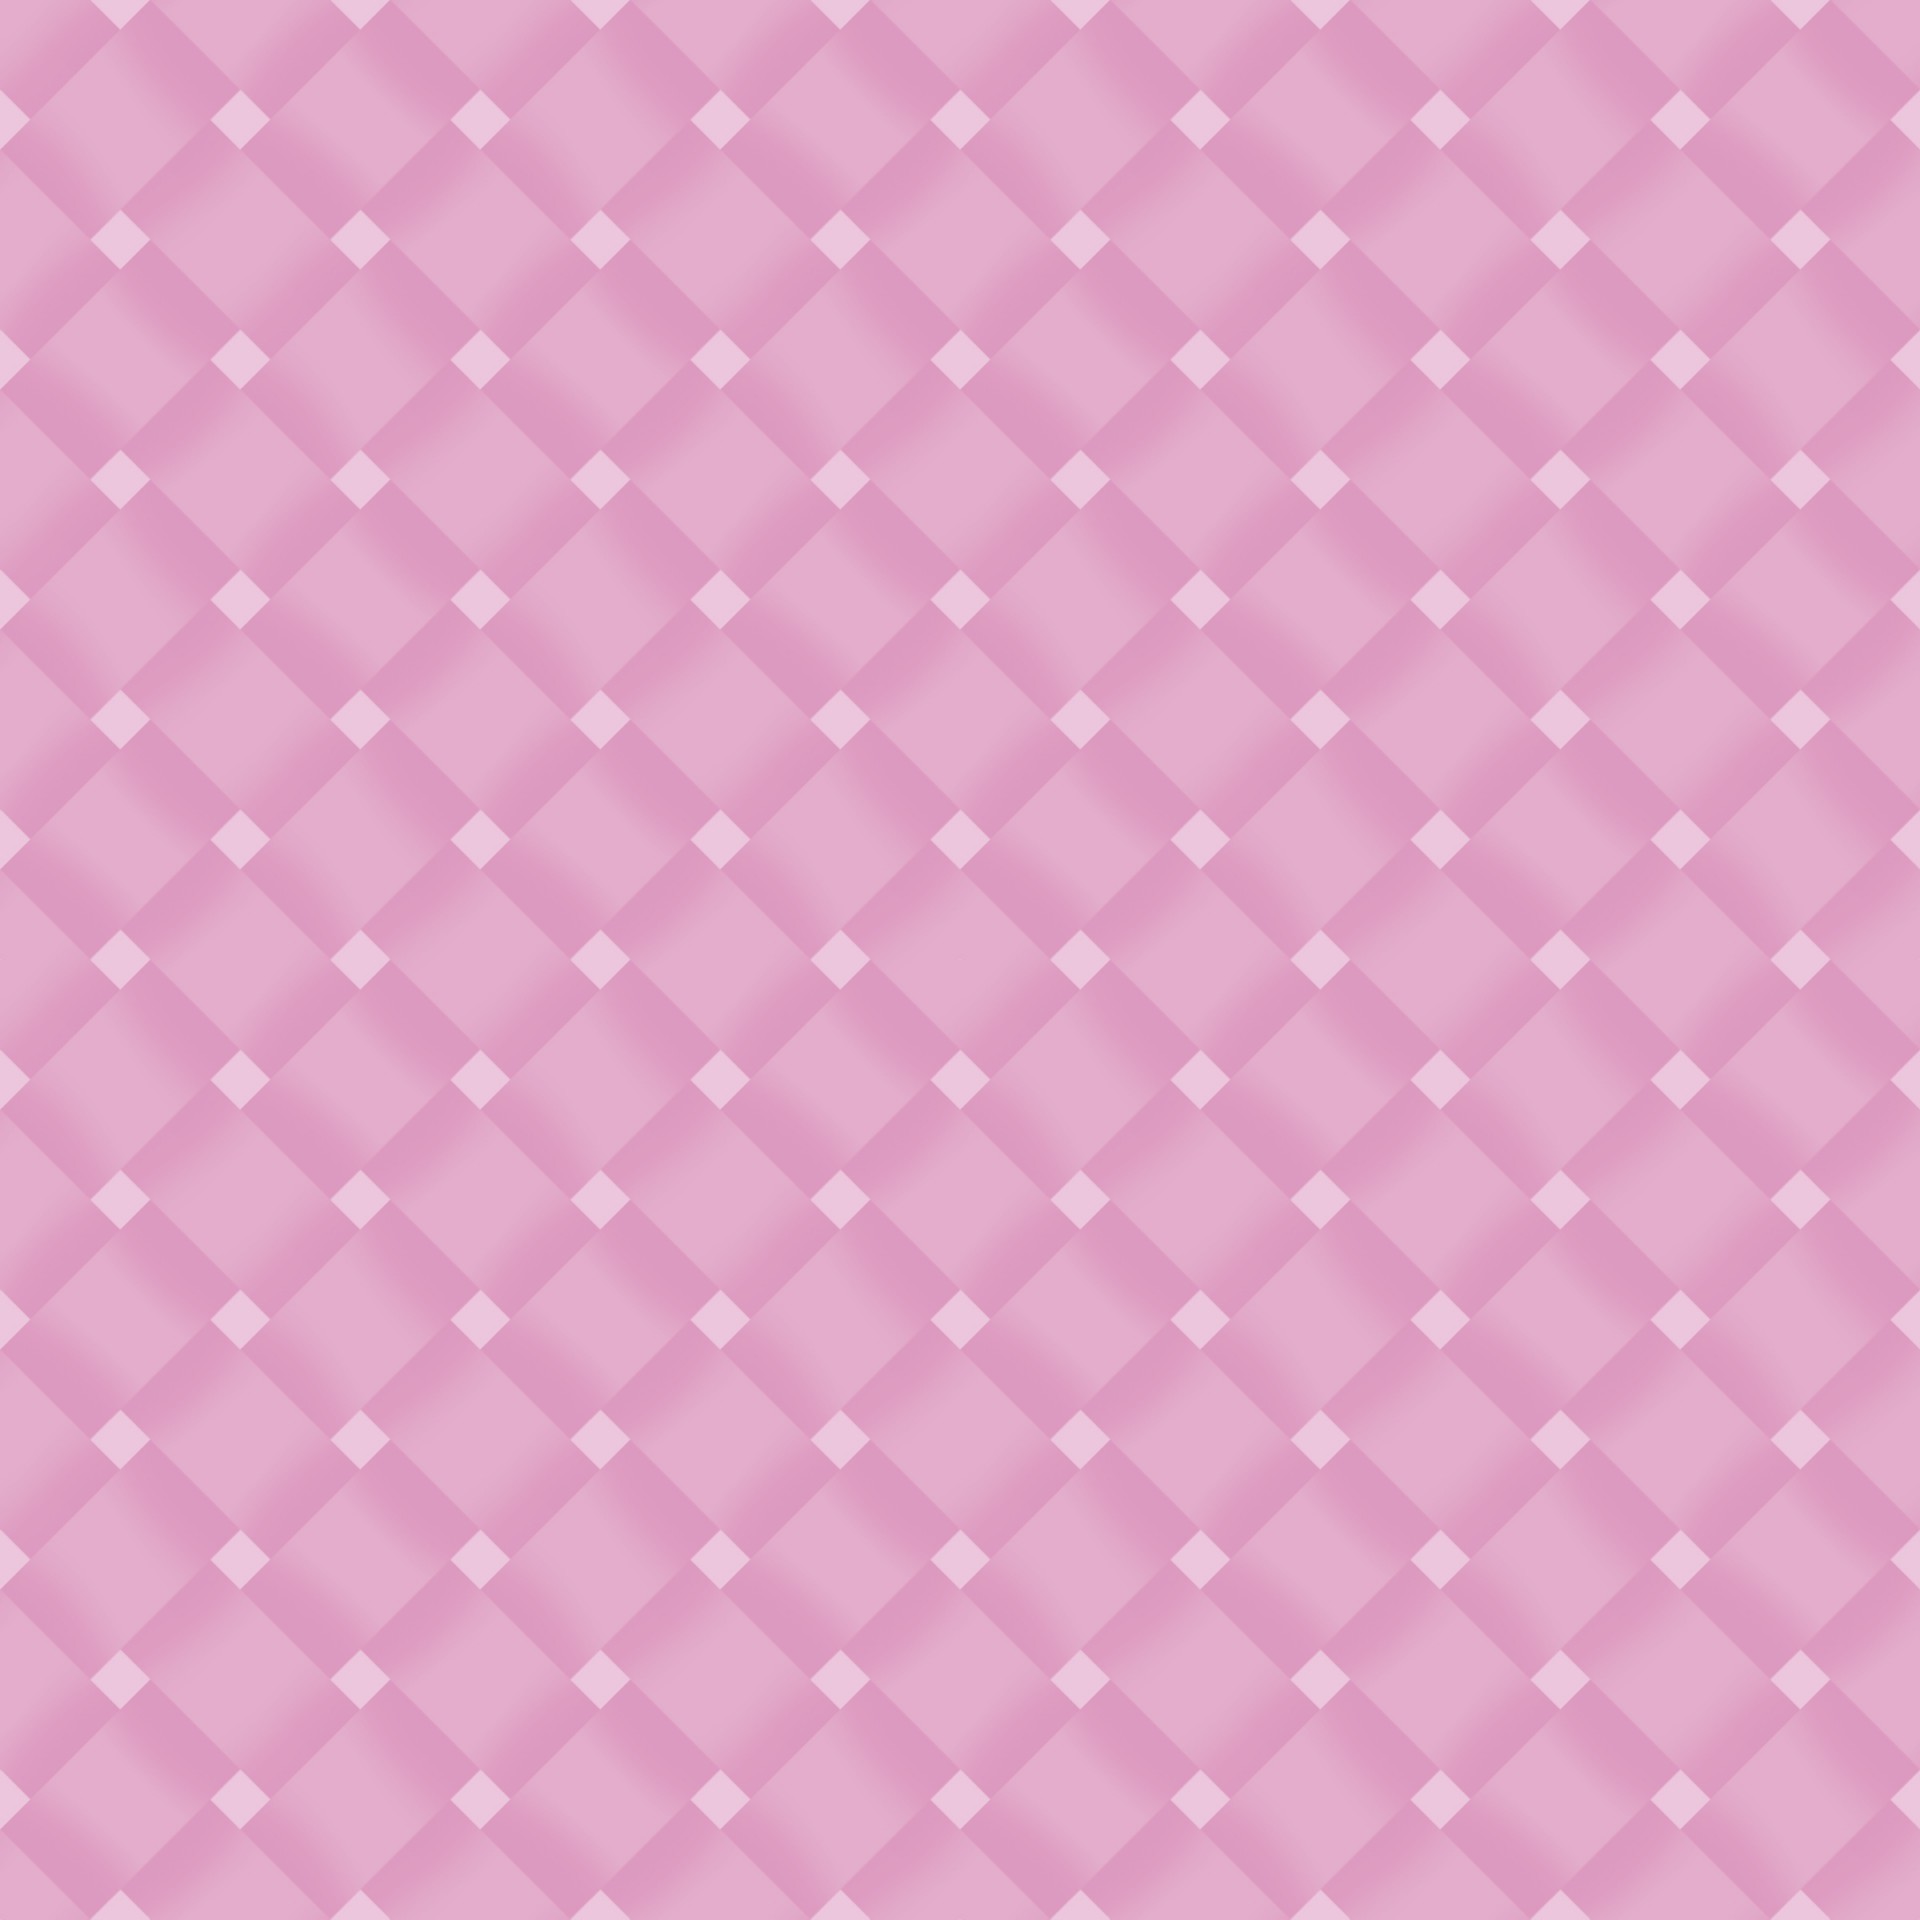 woven pink pale pink ribbons - Your premium download is greatly appreciated – enjoy!